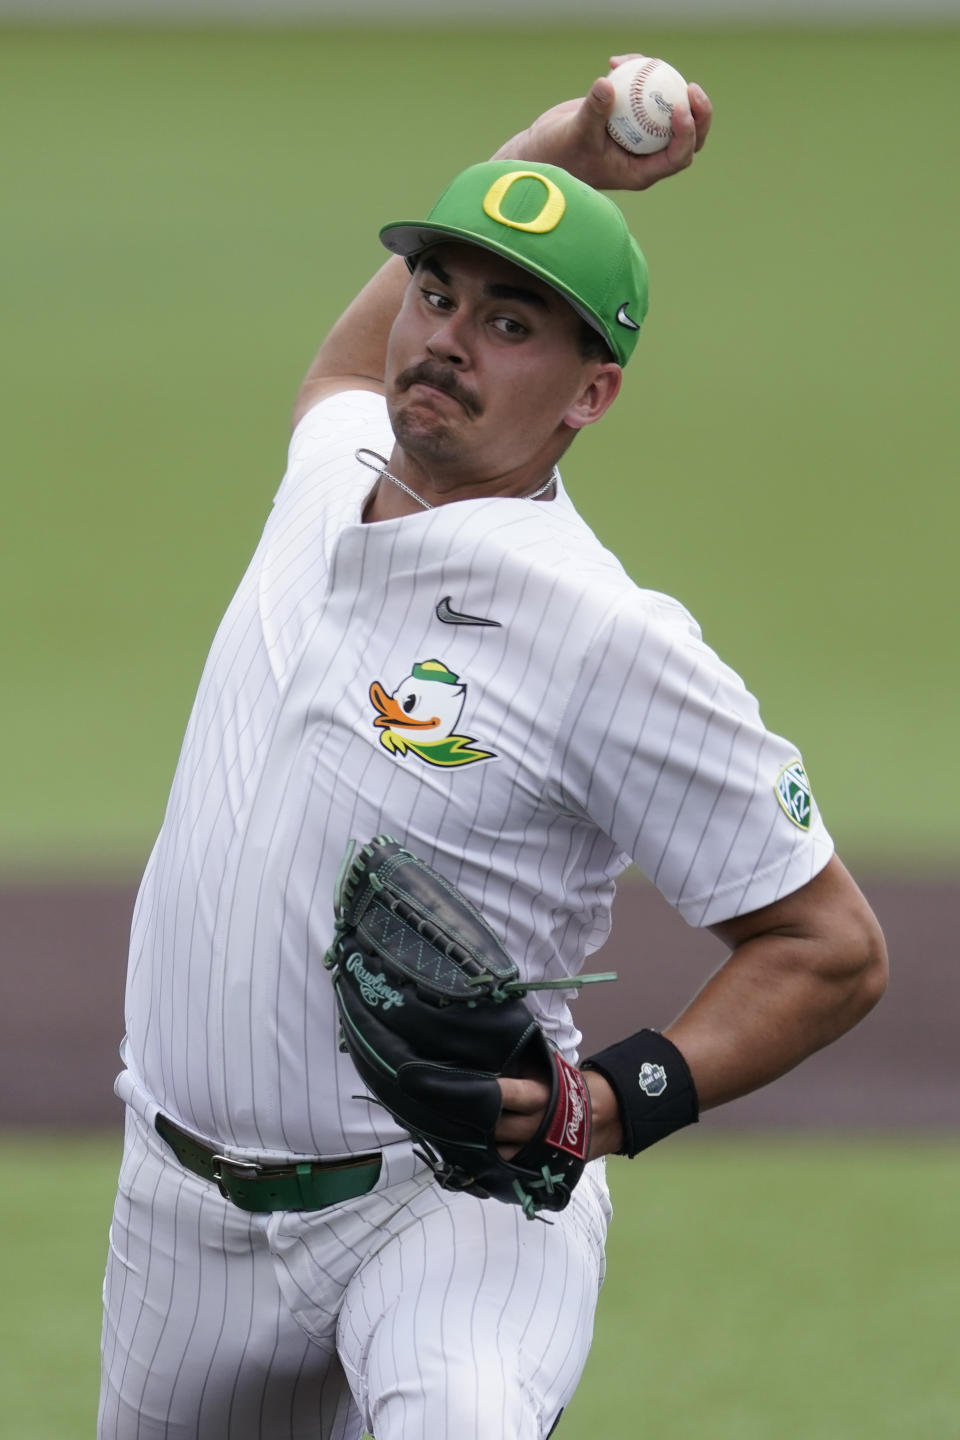 Oregon pitcher Logan Mercado pitches against Xavier during the first inning of an NCAA college baseball tournament regional game, Friday, June 2, 2023, in Nashville, Tenn. (AP Photo/George Walker IV)